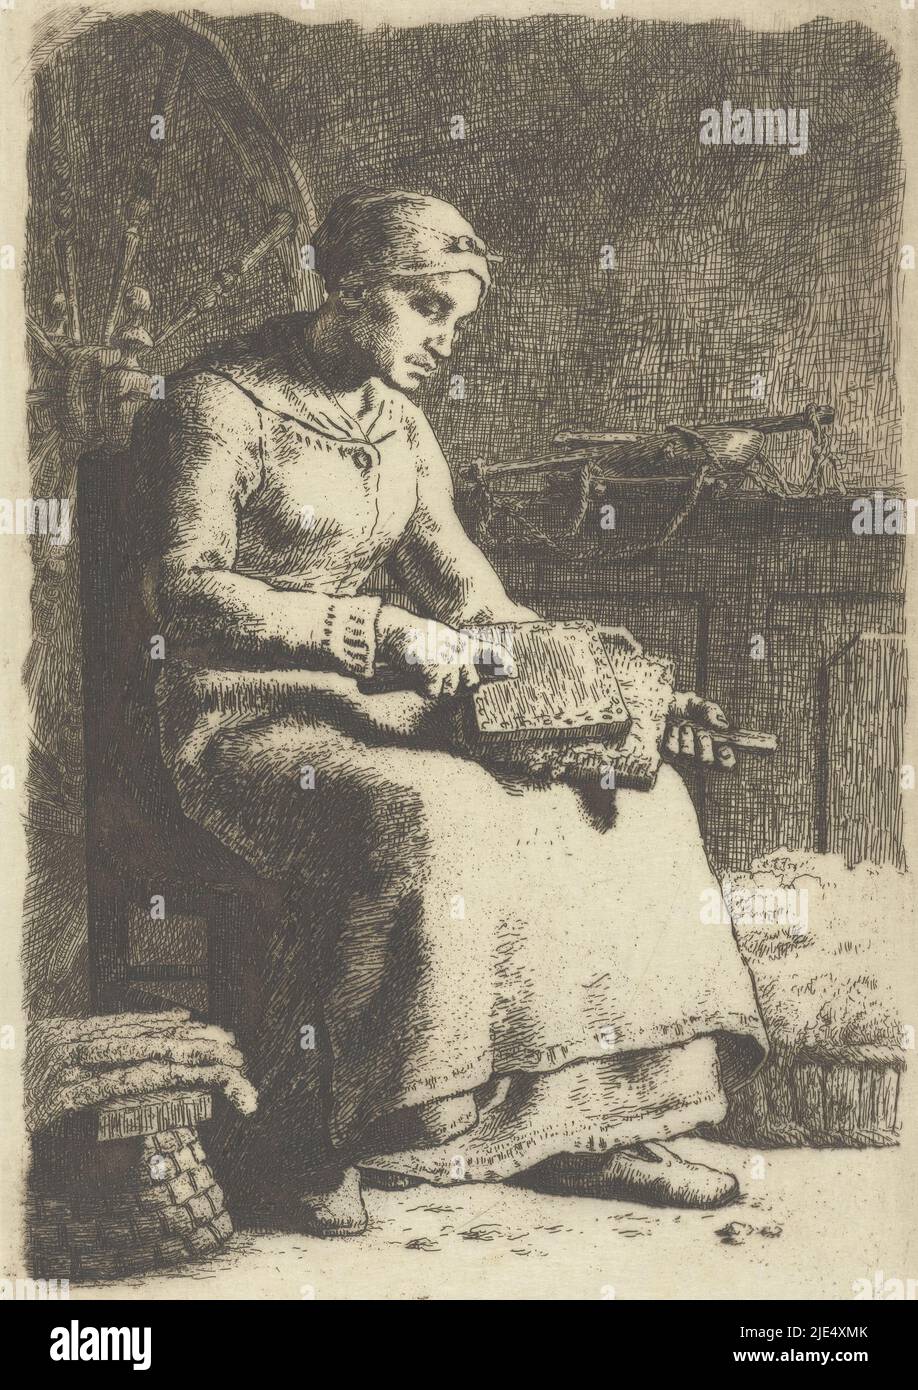 A woman sits on a chair and holds in her hands two cards with which she purifies wool. Next to her are baskets of wool. Probably behind the woman is a spinning wheel, Woman sits on a chair and cards wool La cardeuse, print maker: Jean François Millet, Jean François Millet, 1855 - 1857, paper, etching, h 258 mm × w 177 mm Stock Photo